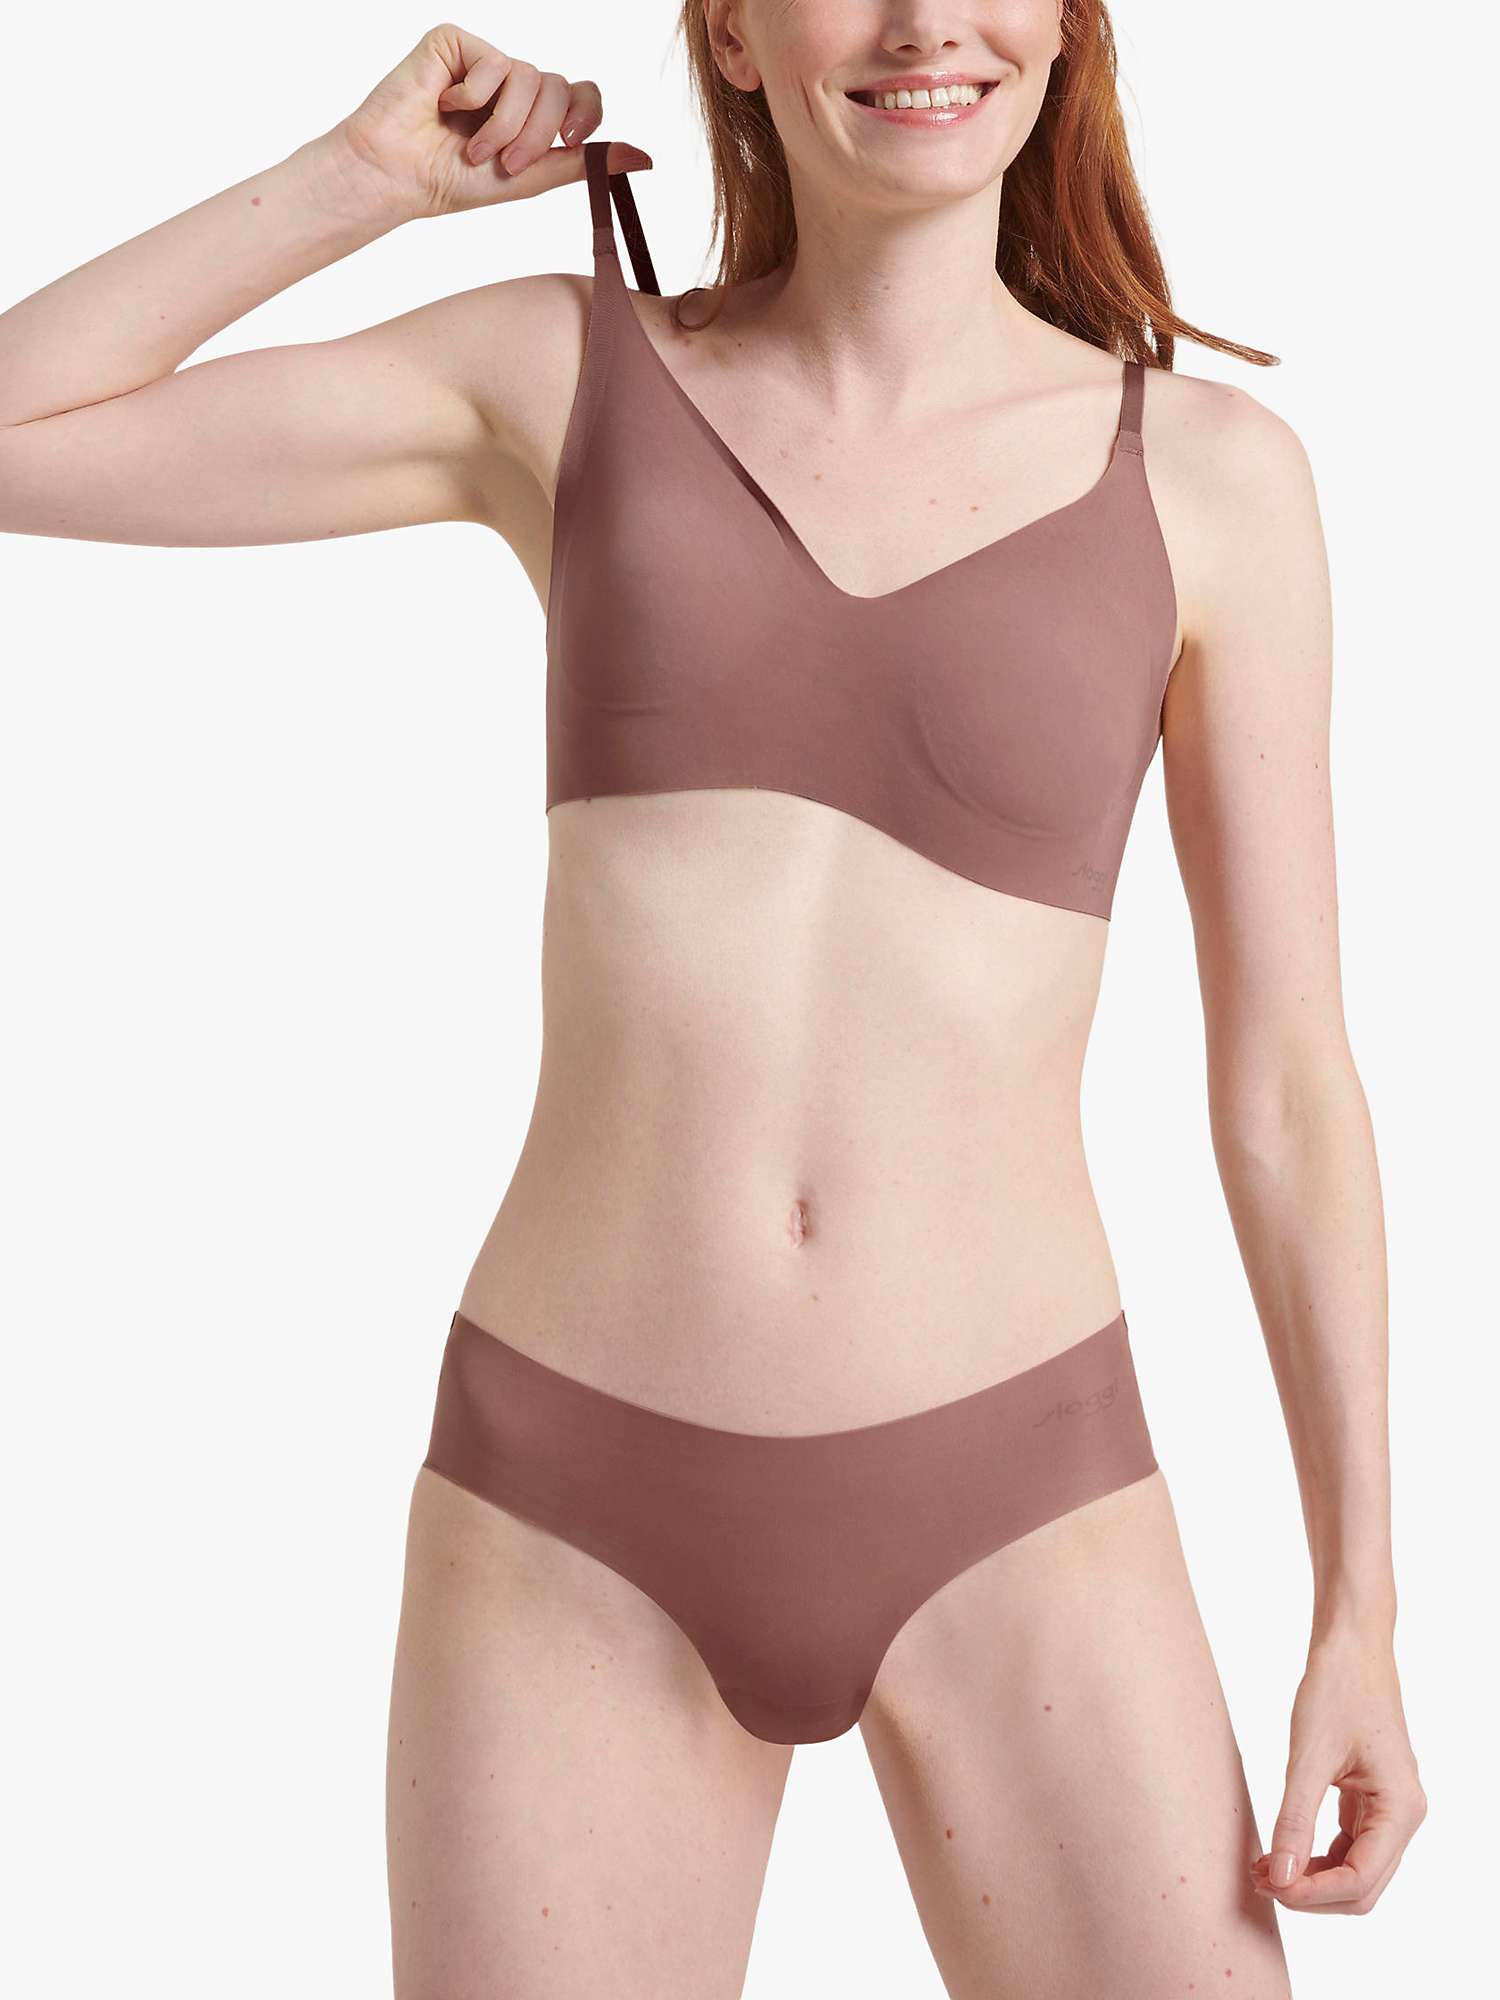 Buy sloggi ZERO Microfibre Hipster Knickers, Pack of 2 Online at johnlewis.com